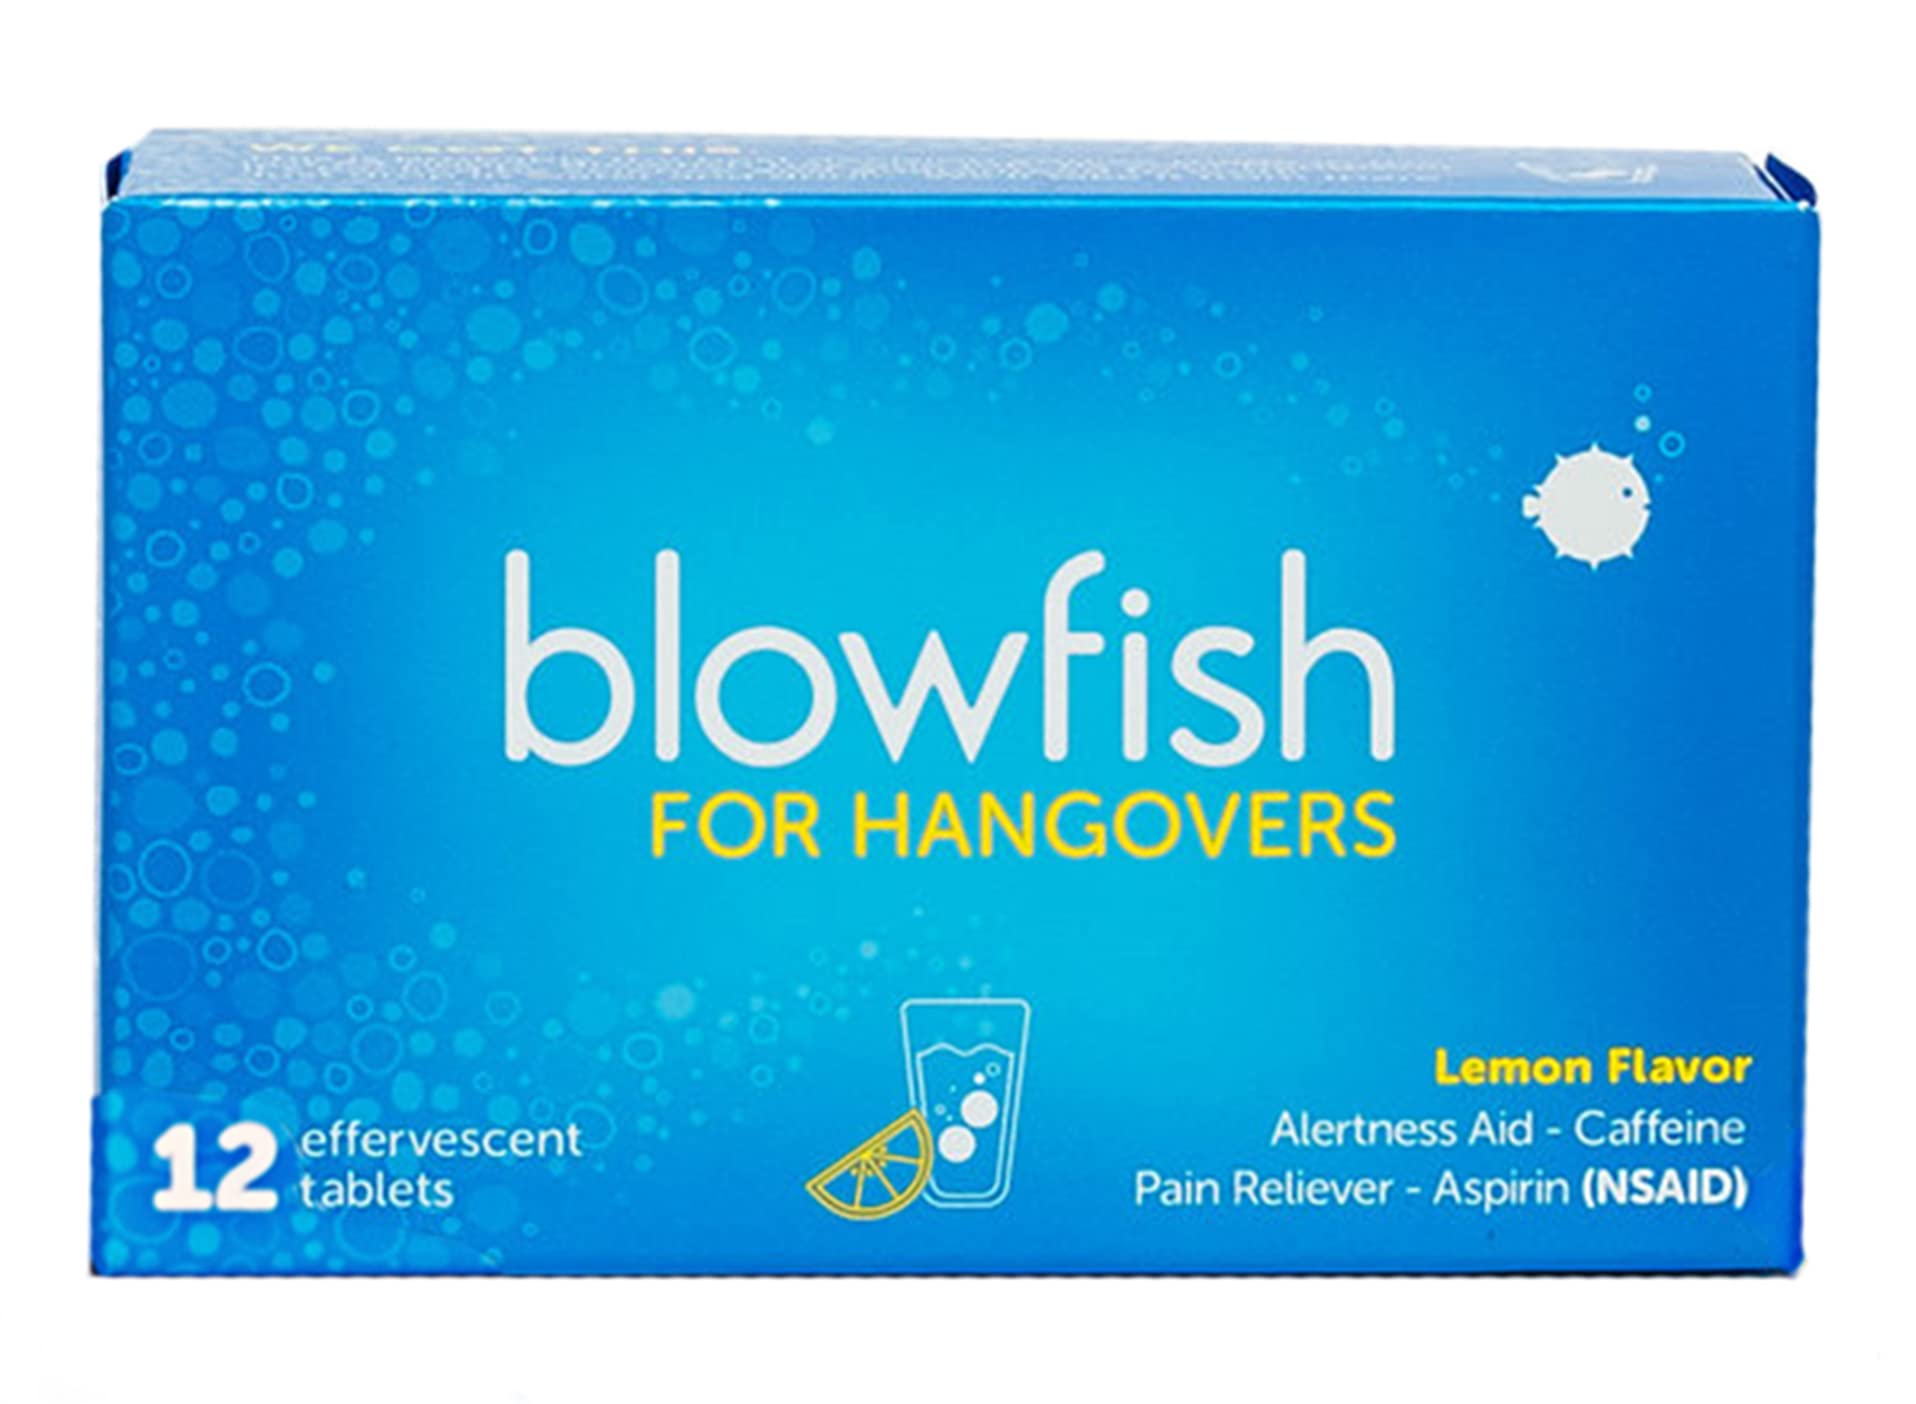 Blowfish for Hangovers - FDA-Recognized Hangover Relief